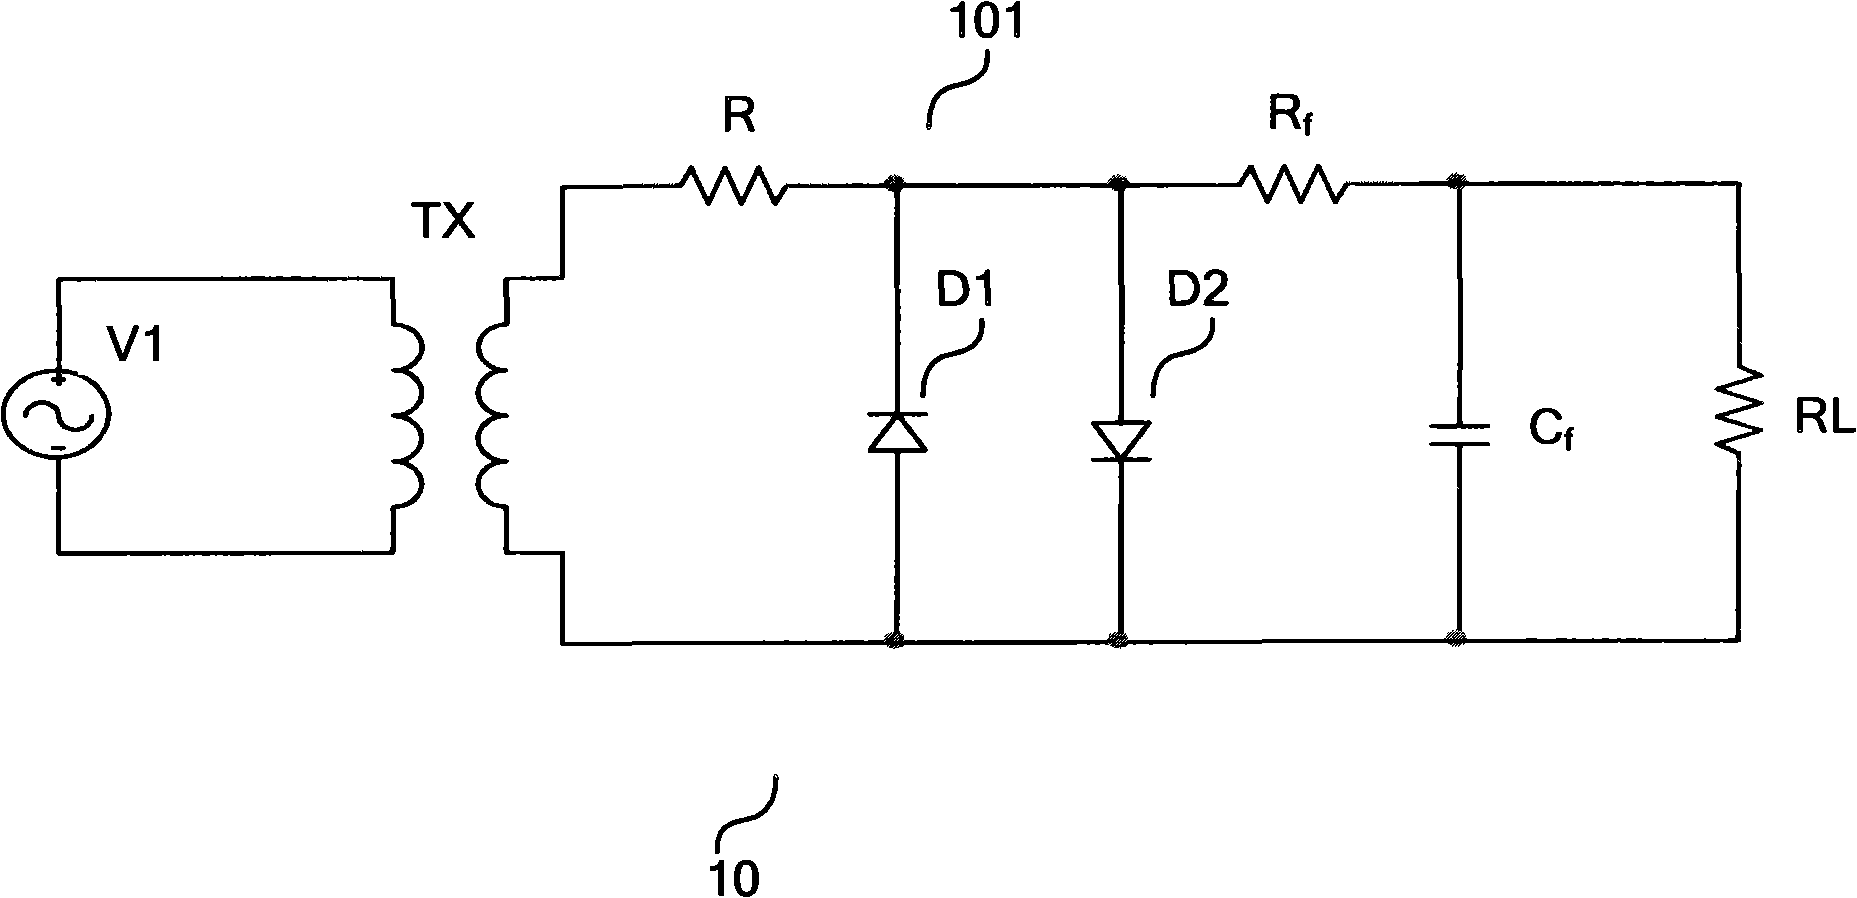 Voltage limiting device